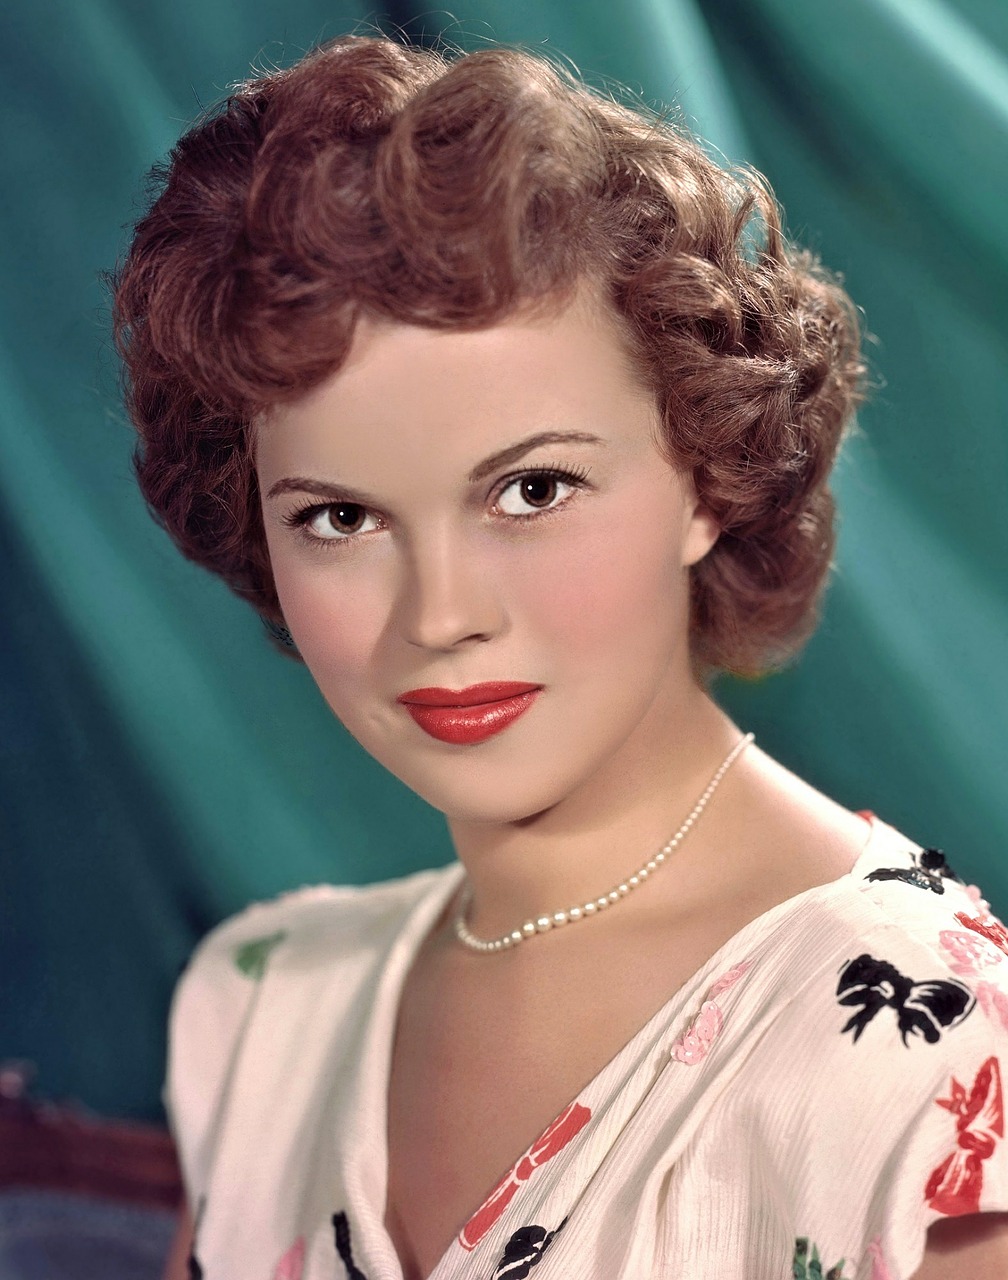 shirley temple actress vintage free photo